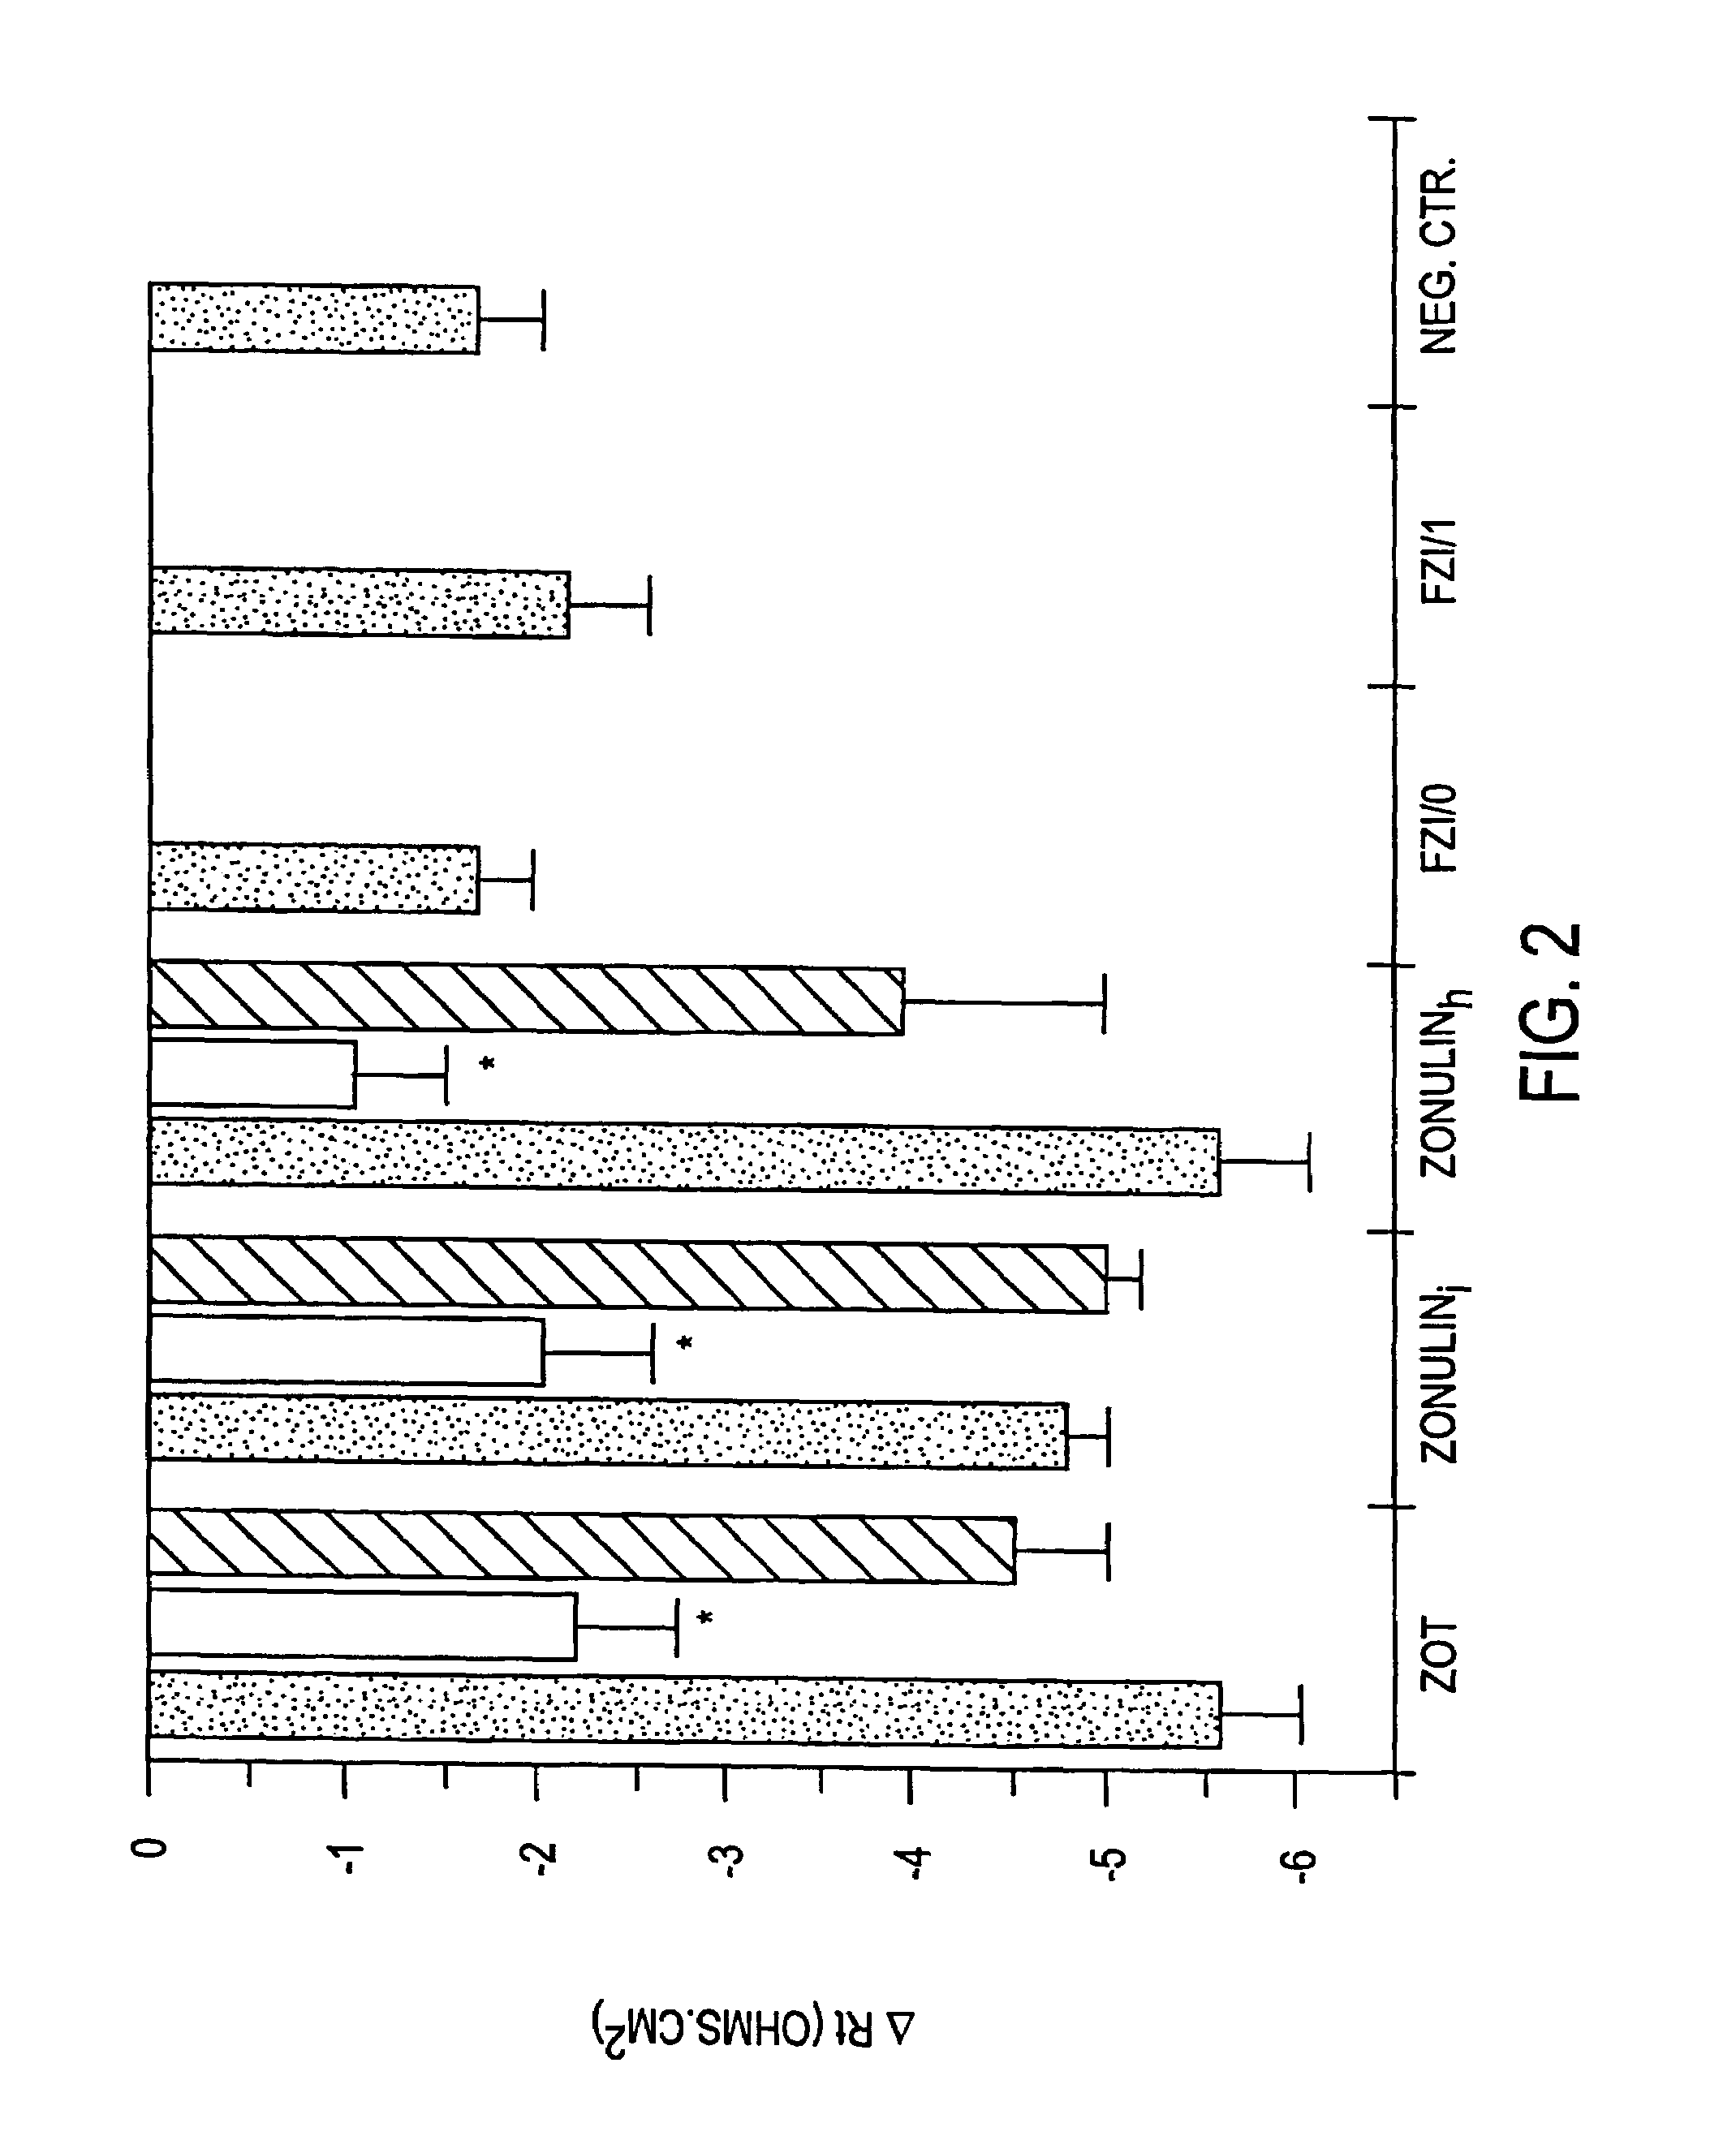 Method of use of peptide antagonists of zonulin to prevent or delay the onset of diabetes